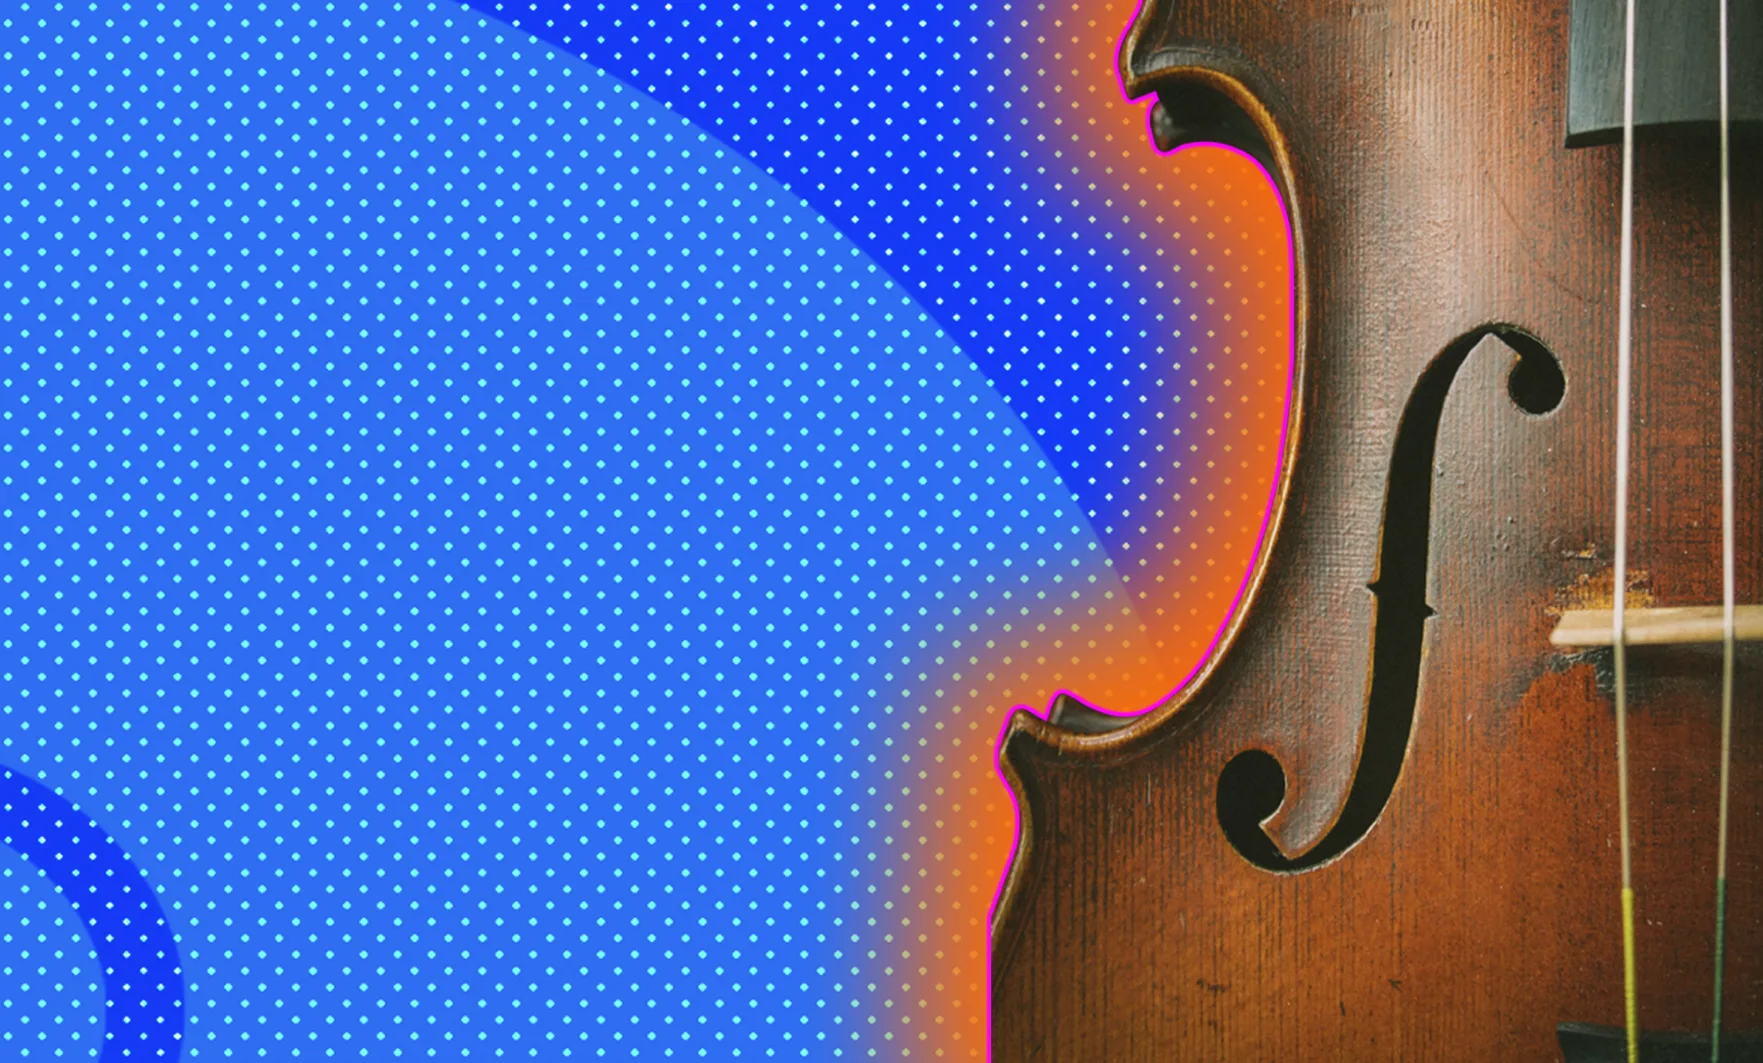 String instrument with a red glow behind it and on a blue background